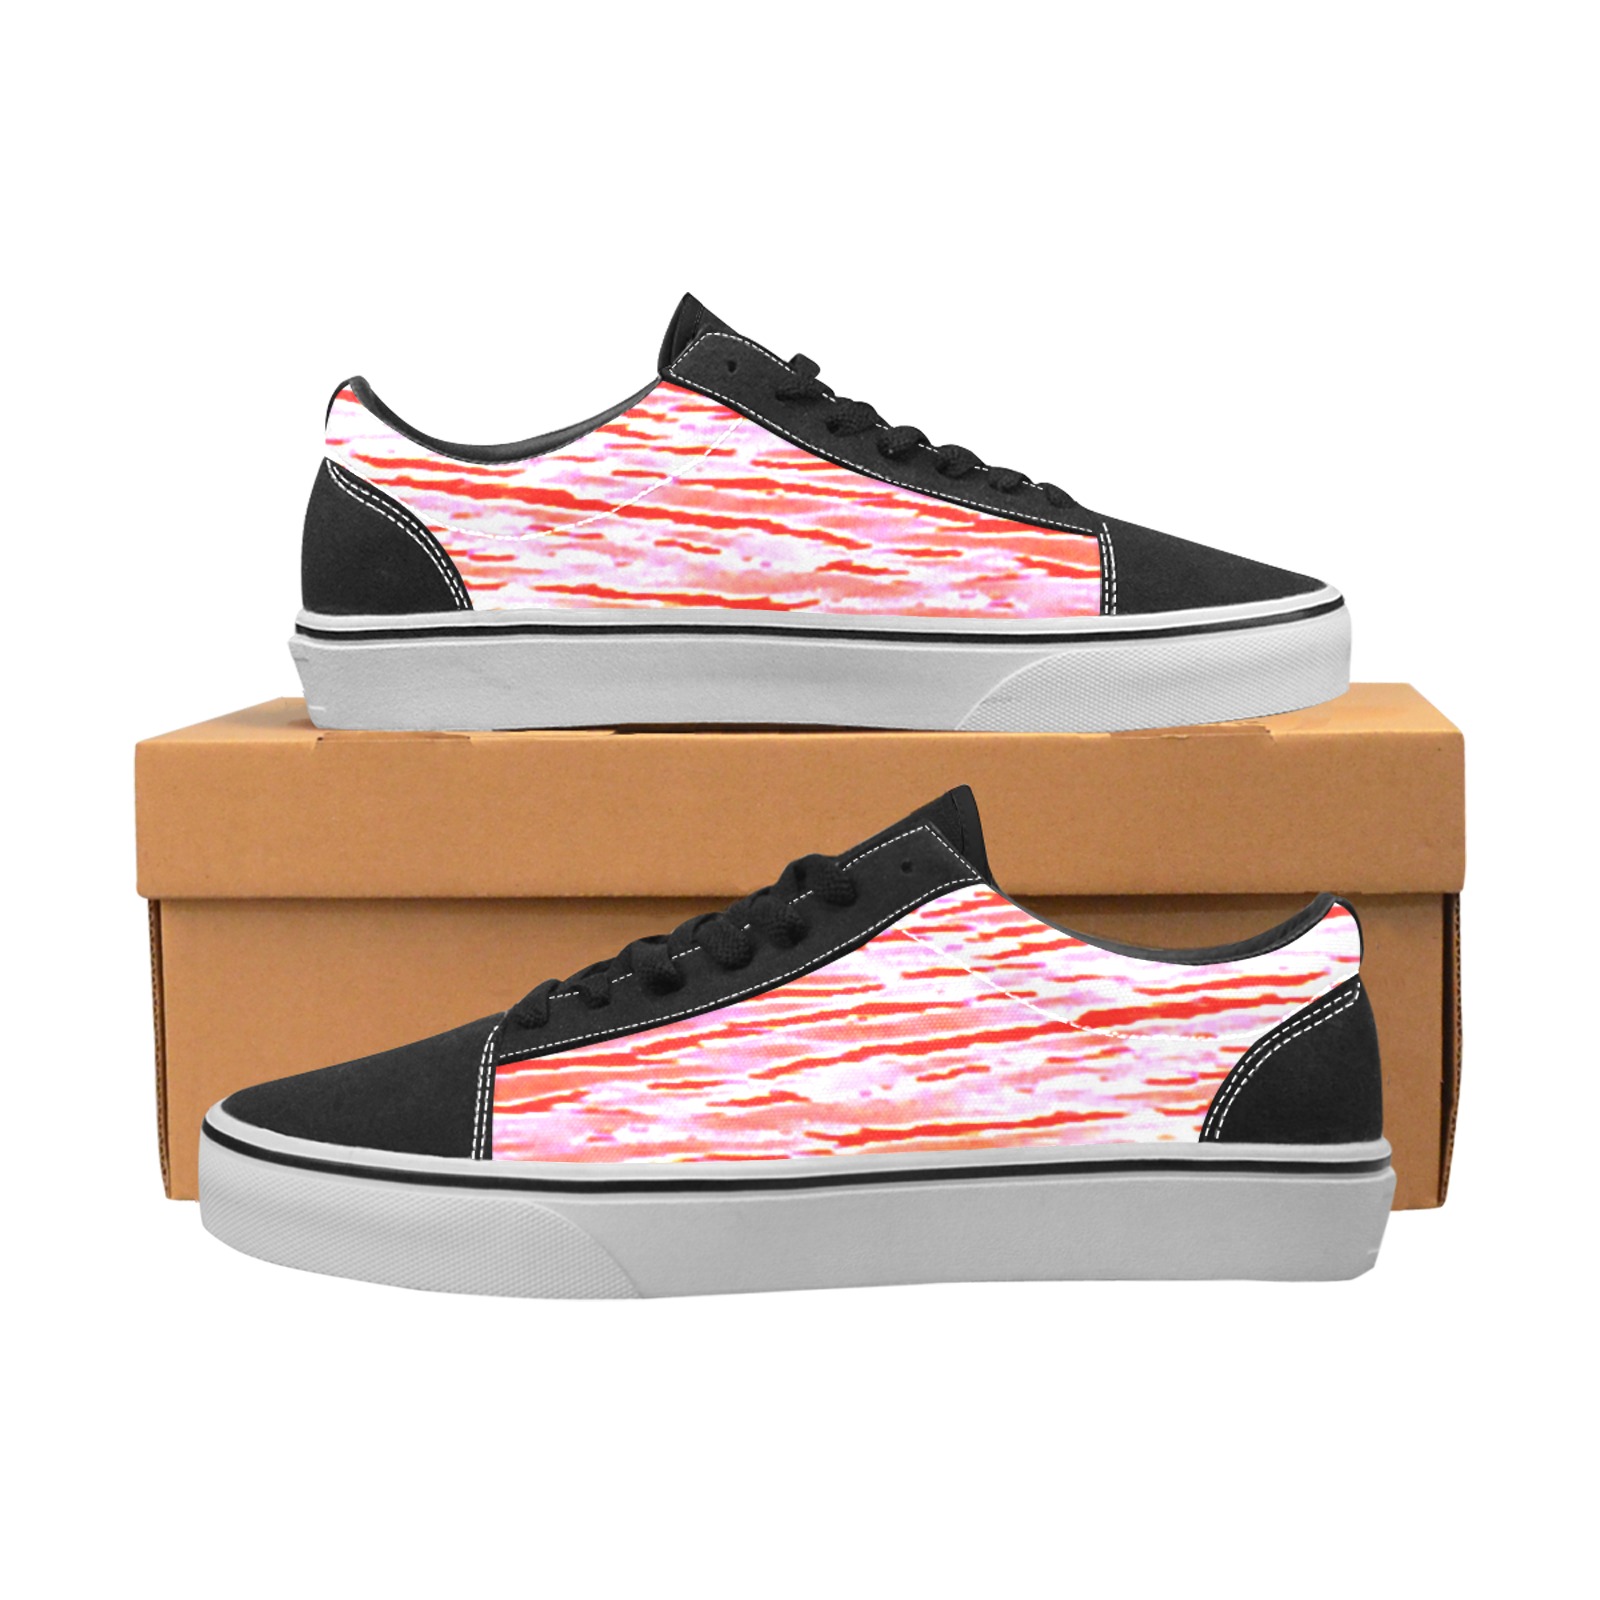 Orange and red water Men's Low Top Skateboarding Shoes (Model E001-2)